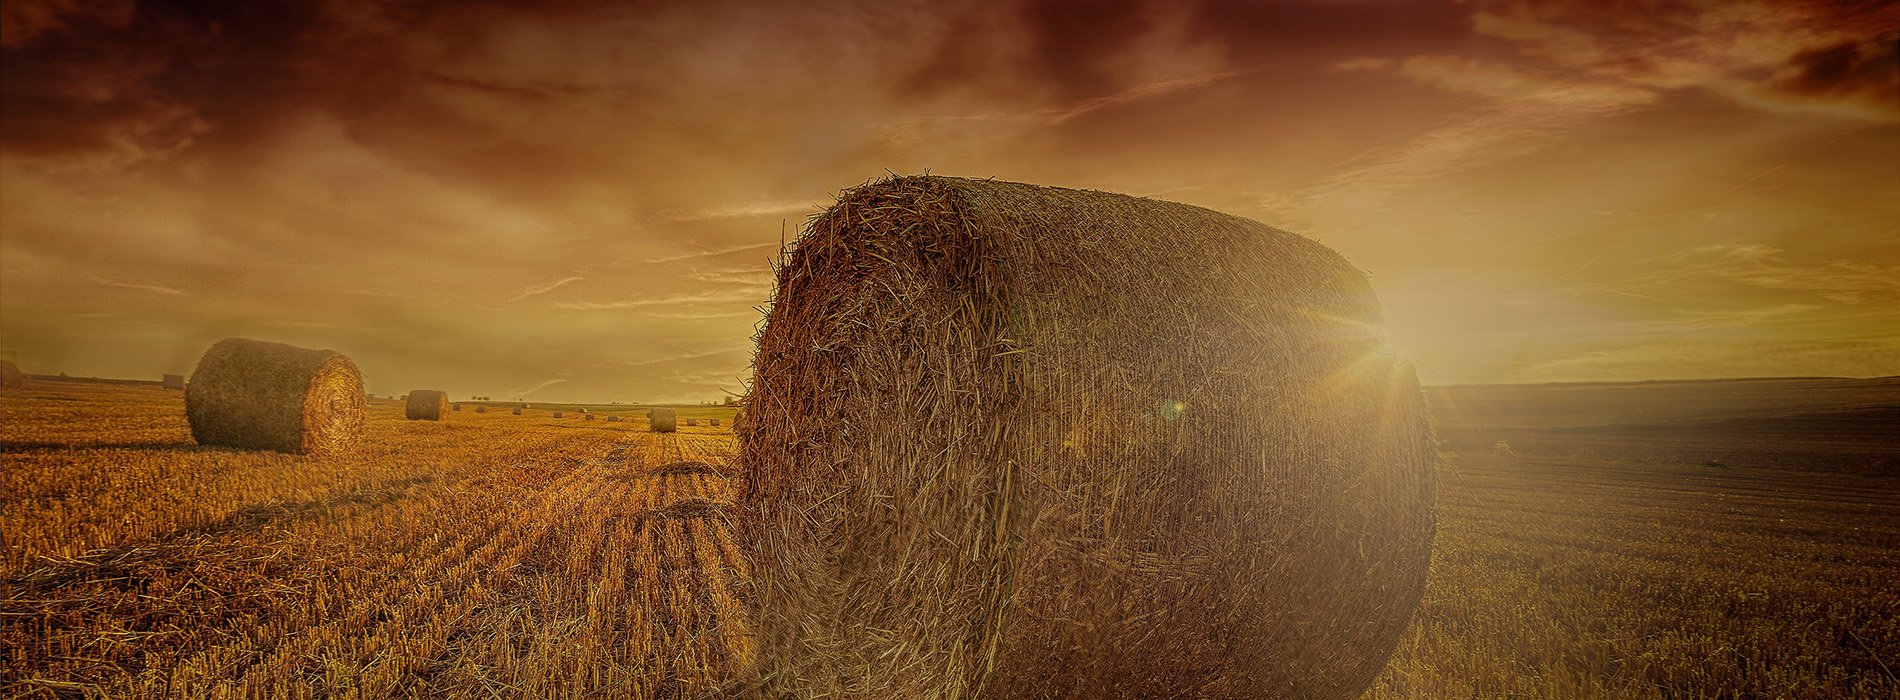 Gloriously dark sky with large bale in front. Photo by Luca Huter on Unsplash